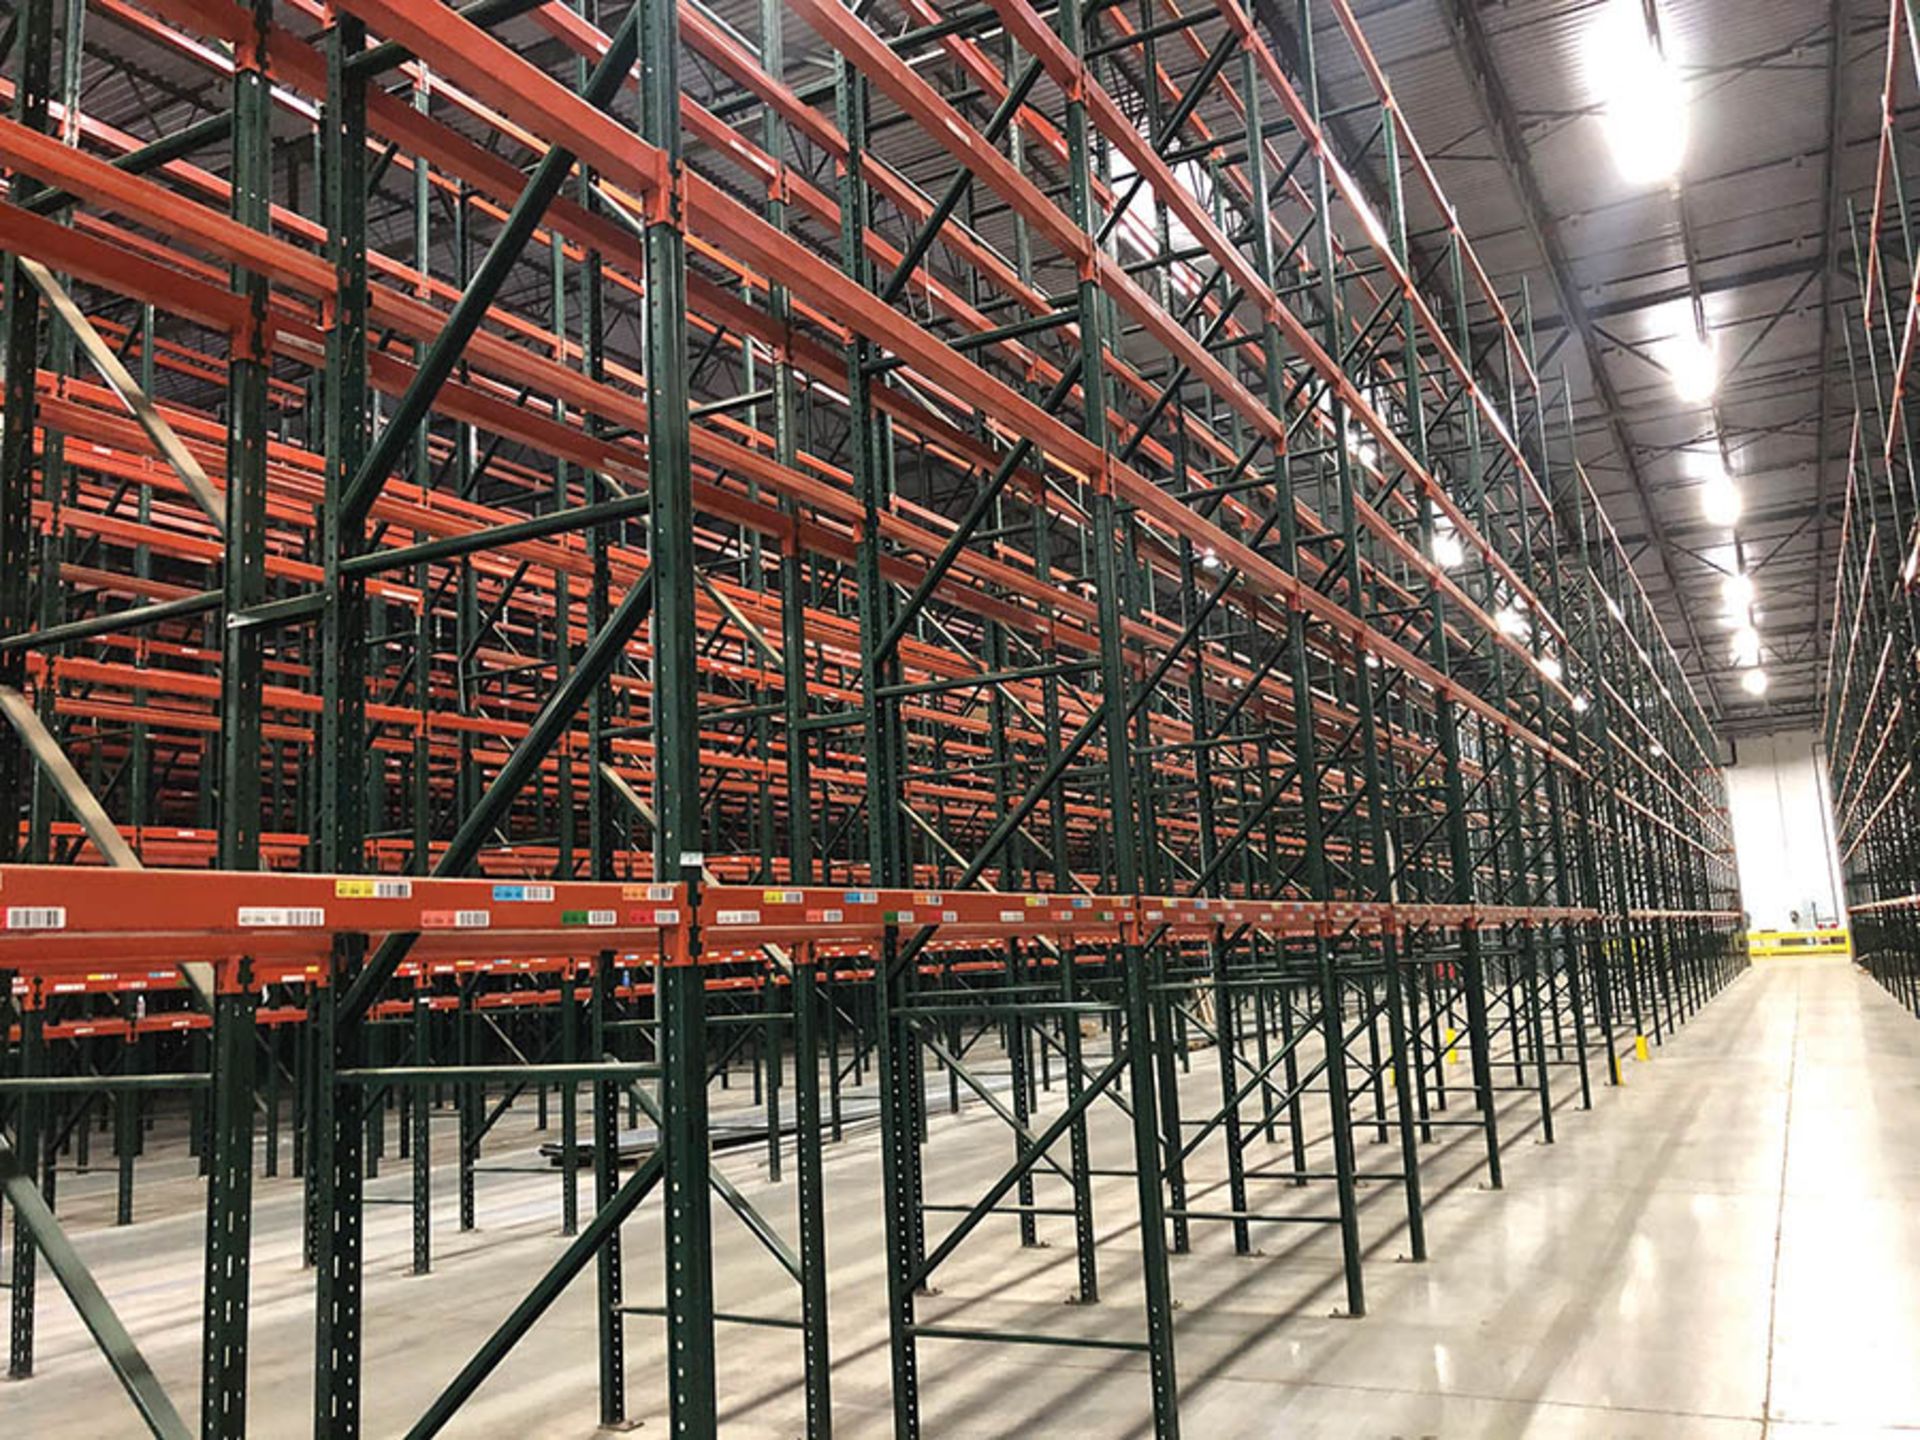 (25) BAYS/SECTIONS OF RIDG-U-RAK PALLET RACKING, CONSISTING OF (27) TOTAL UPRIGHTS- (4) UPRIGHTS ARE